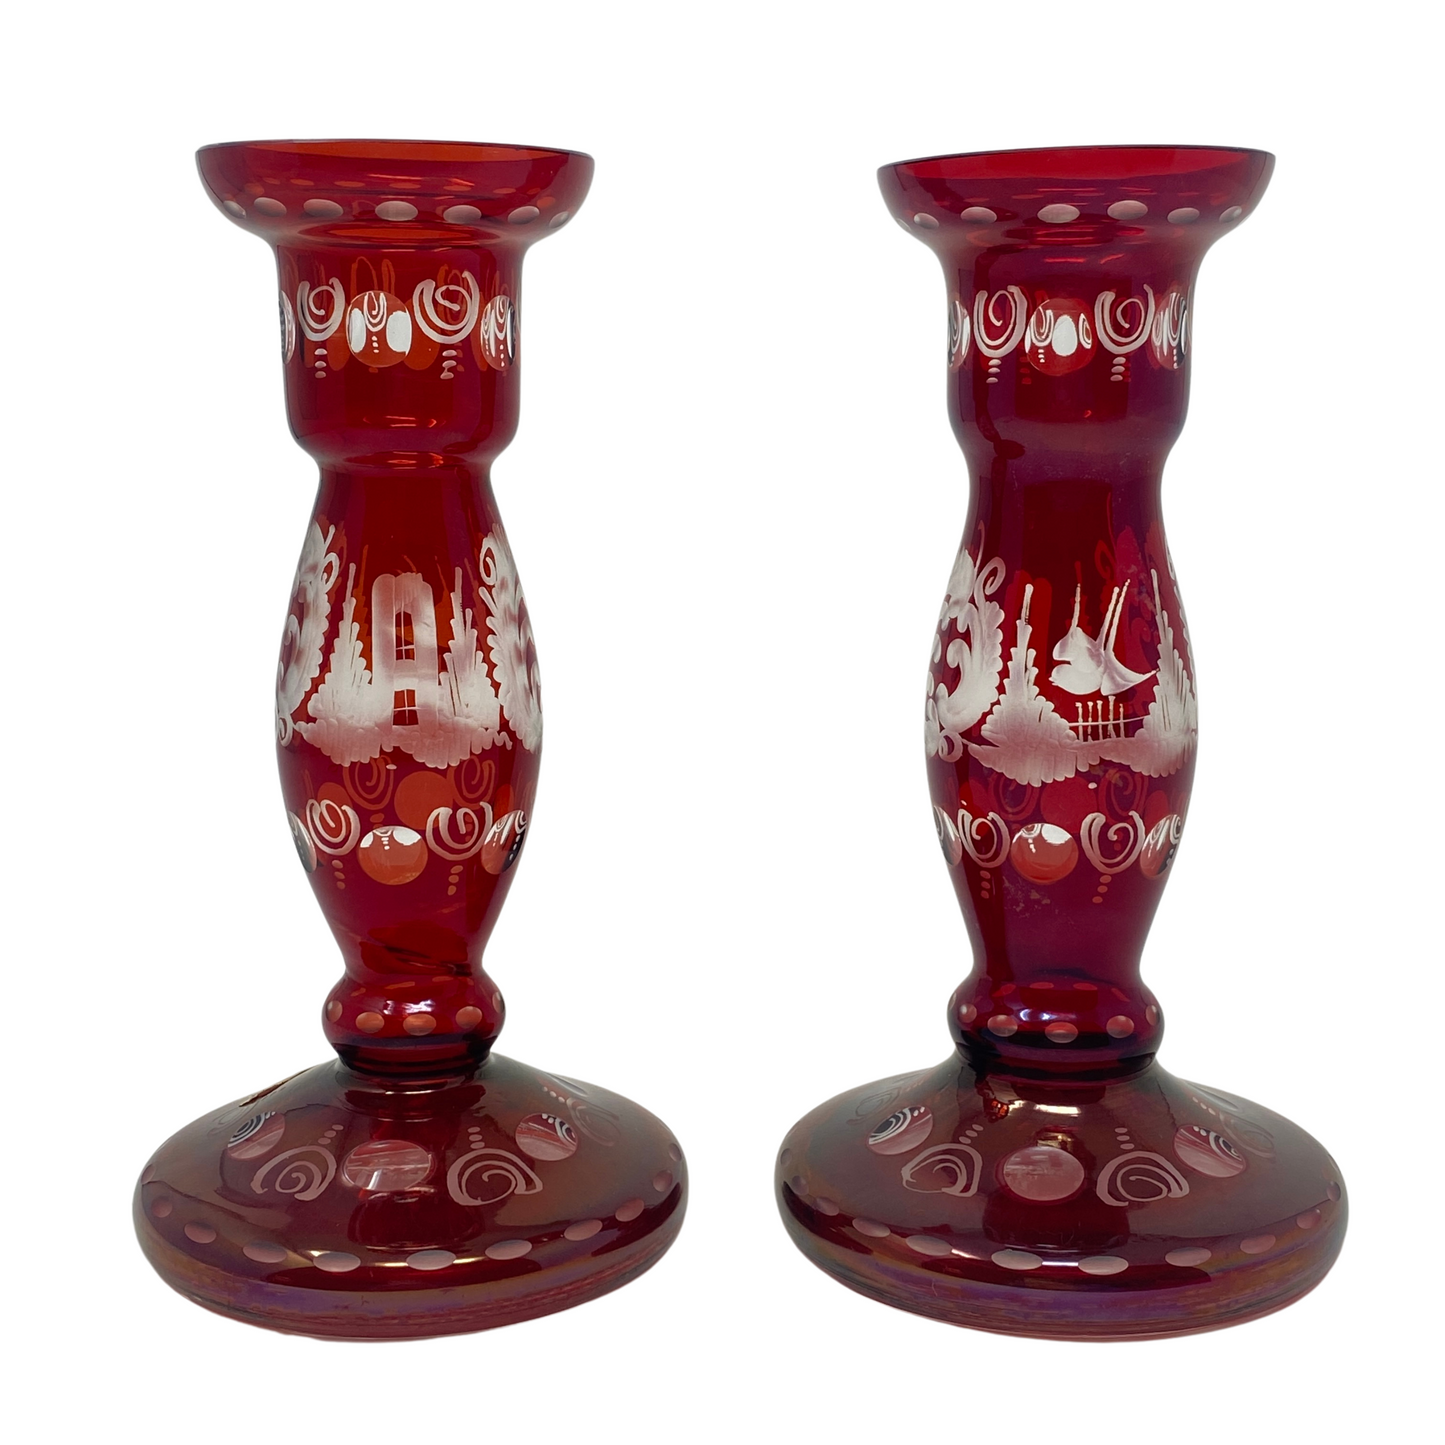 Vintage Bohemian Etched Cut to Clear Ruby Candlesticks (Pair)